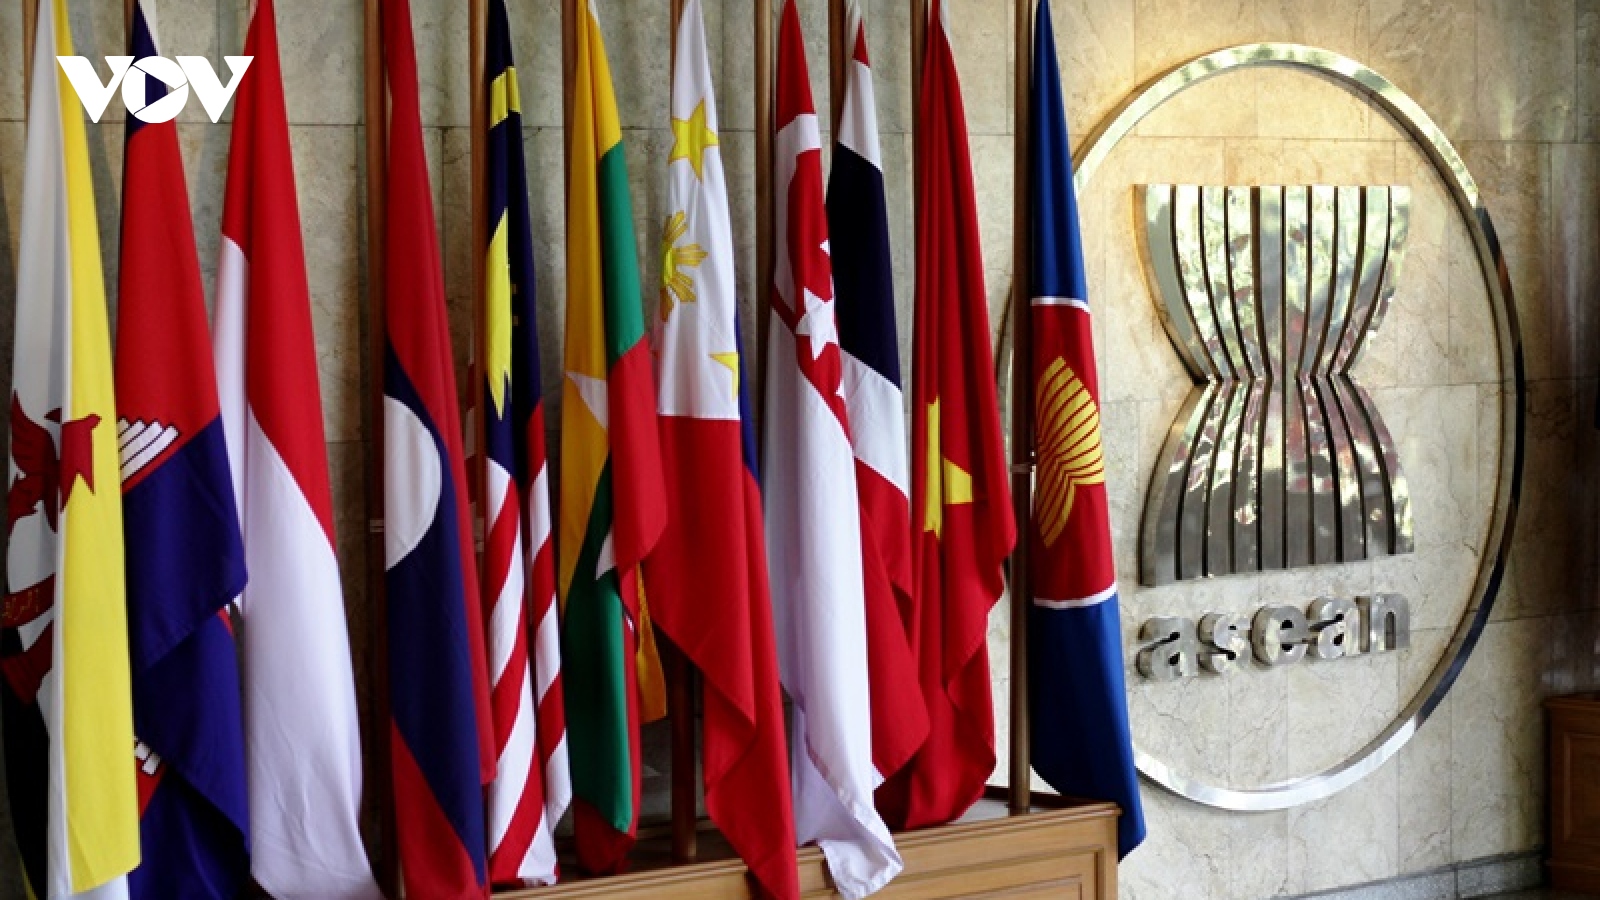 Vietnam proactive in making responsible contributions to ASEAN’s common affairs